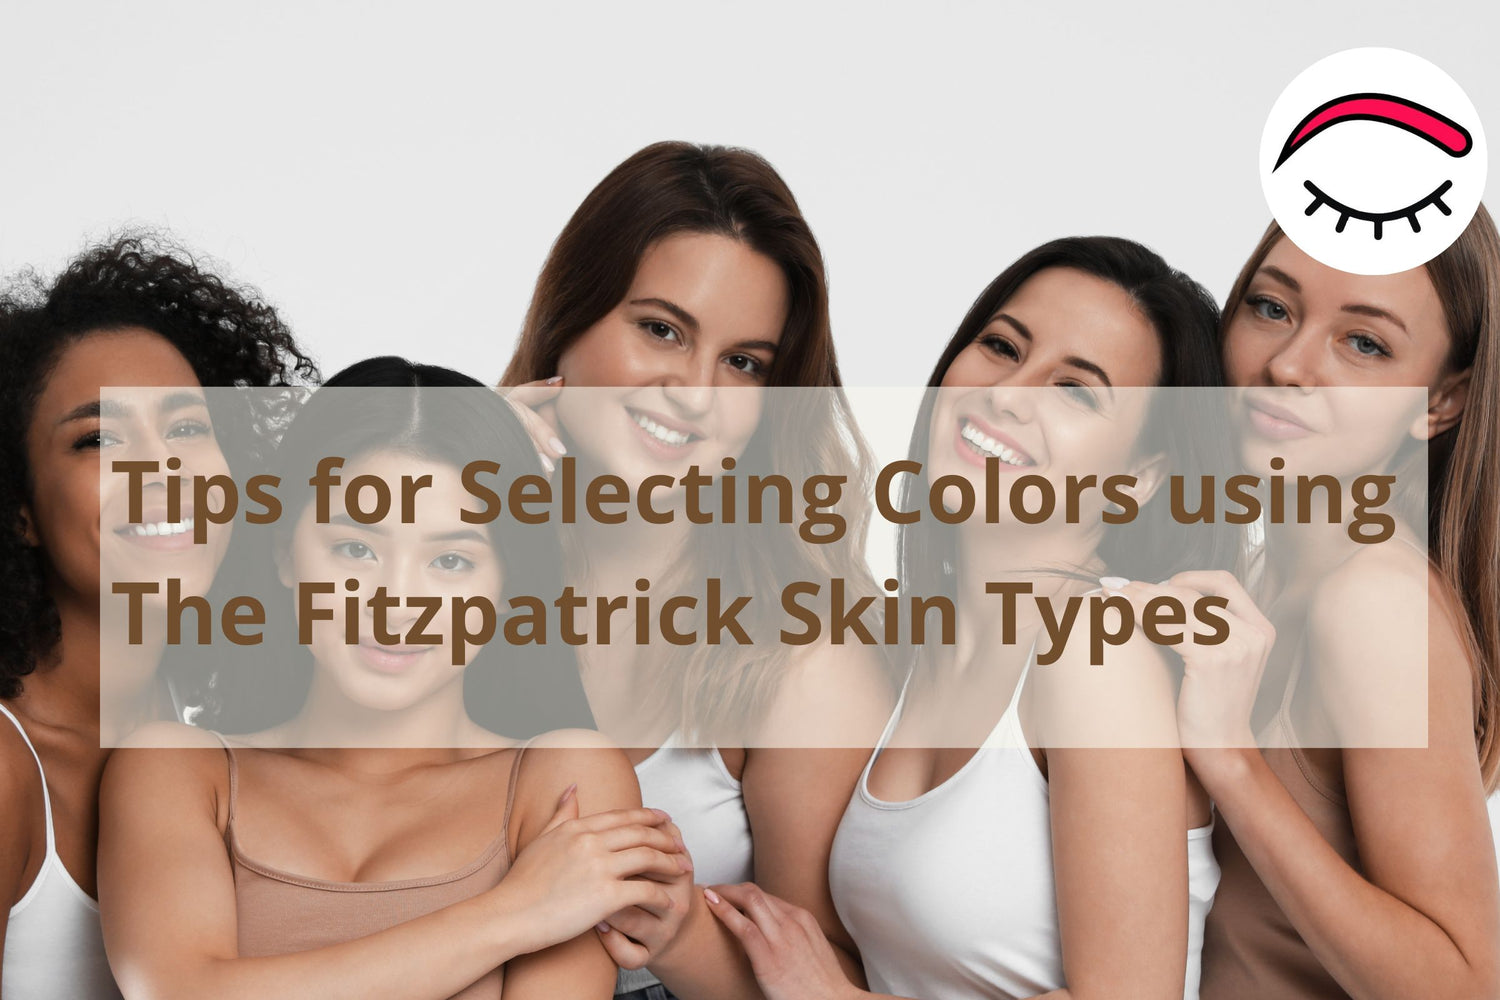 Tips for Selecting Colors using the Fitzpatrick Skin Types